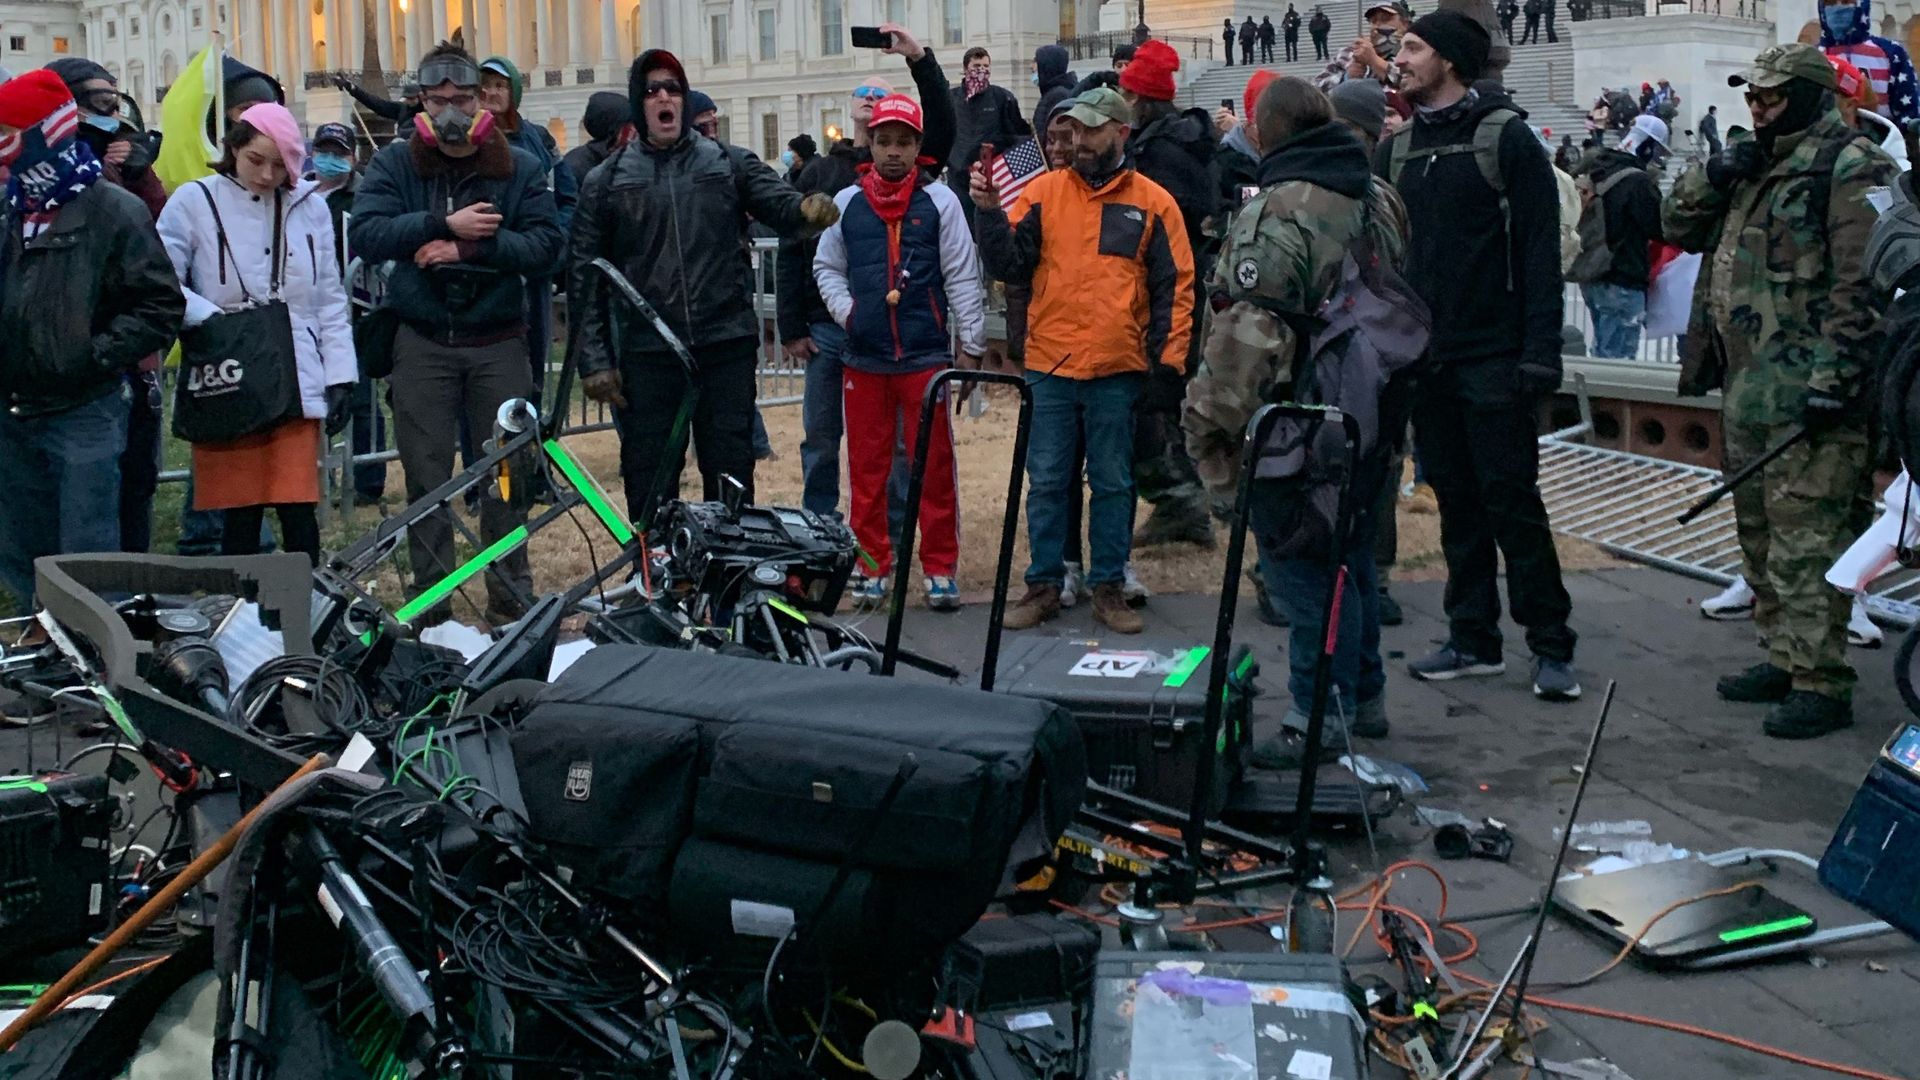 People stand around media equipment destroyed by Trump supporters outside the US Capitol in Washington DC on January 6, 2021